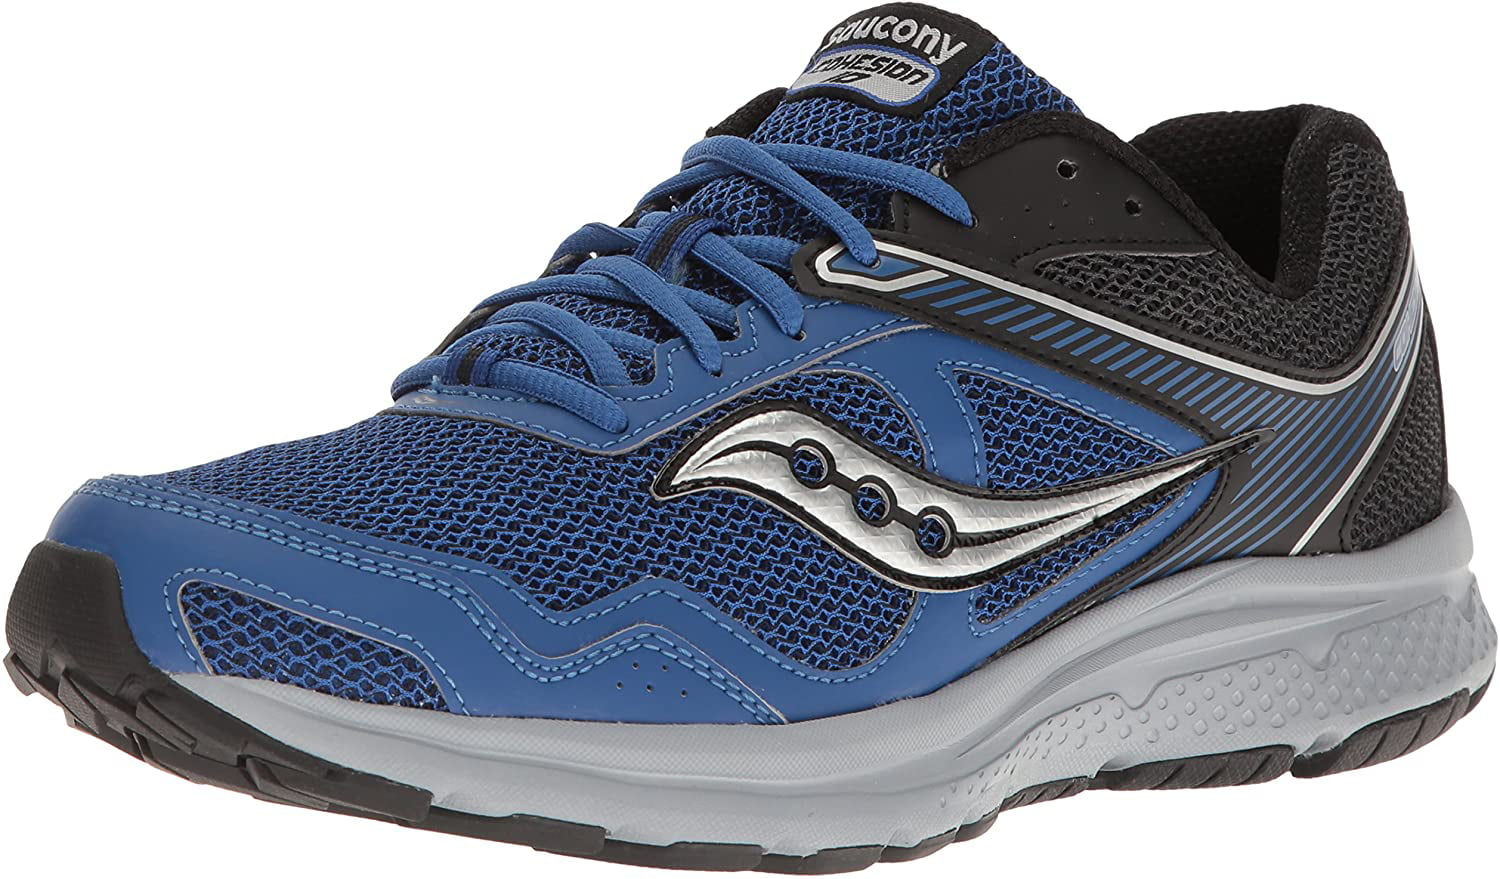 saucony mens running trainers